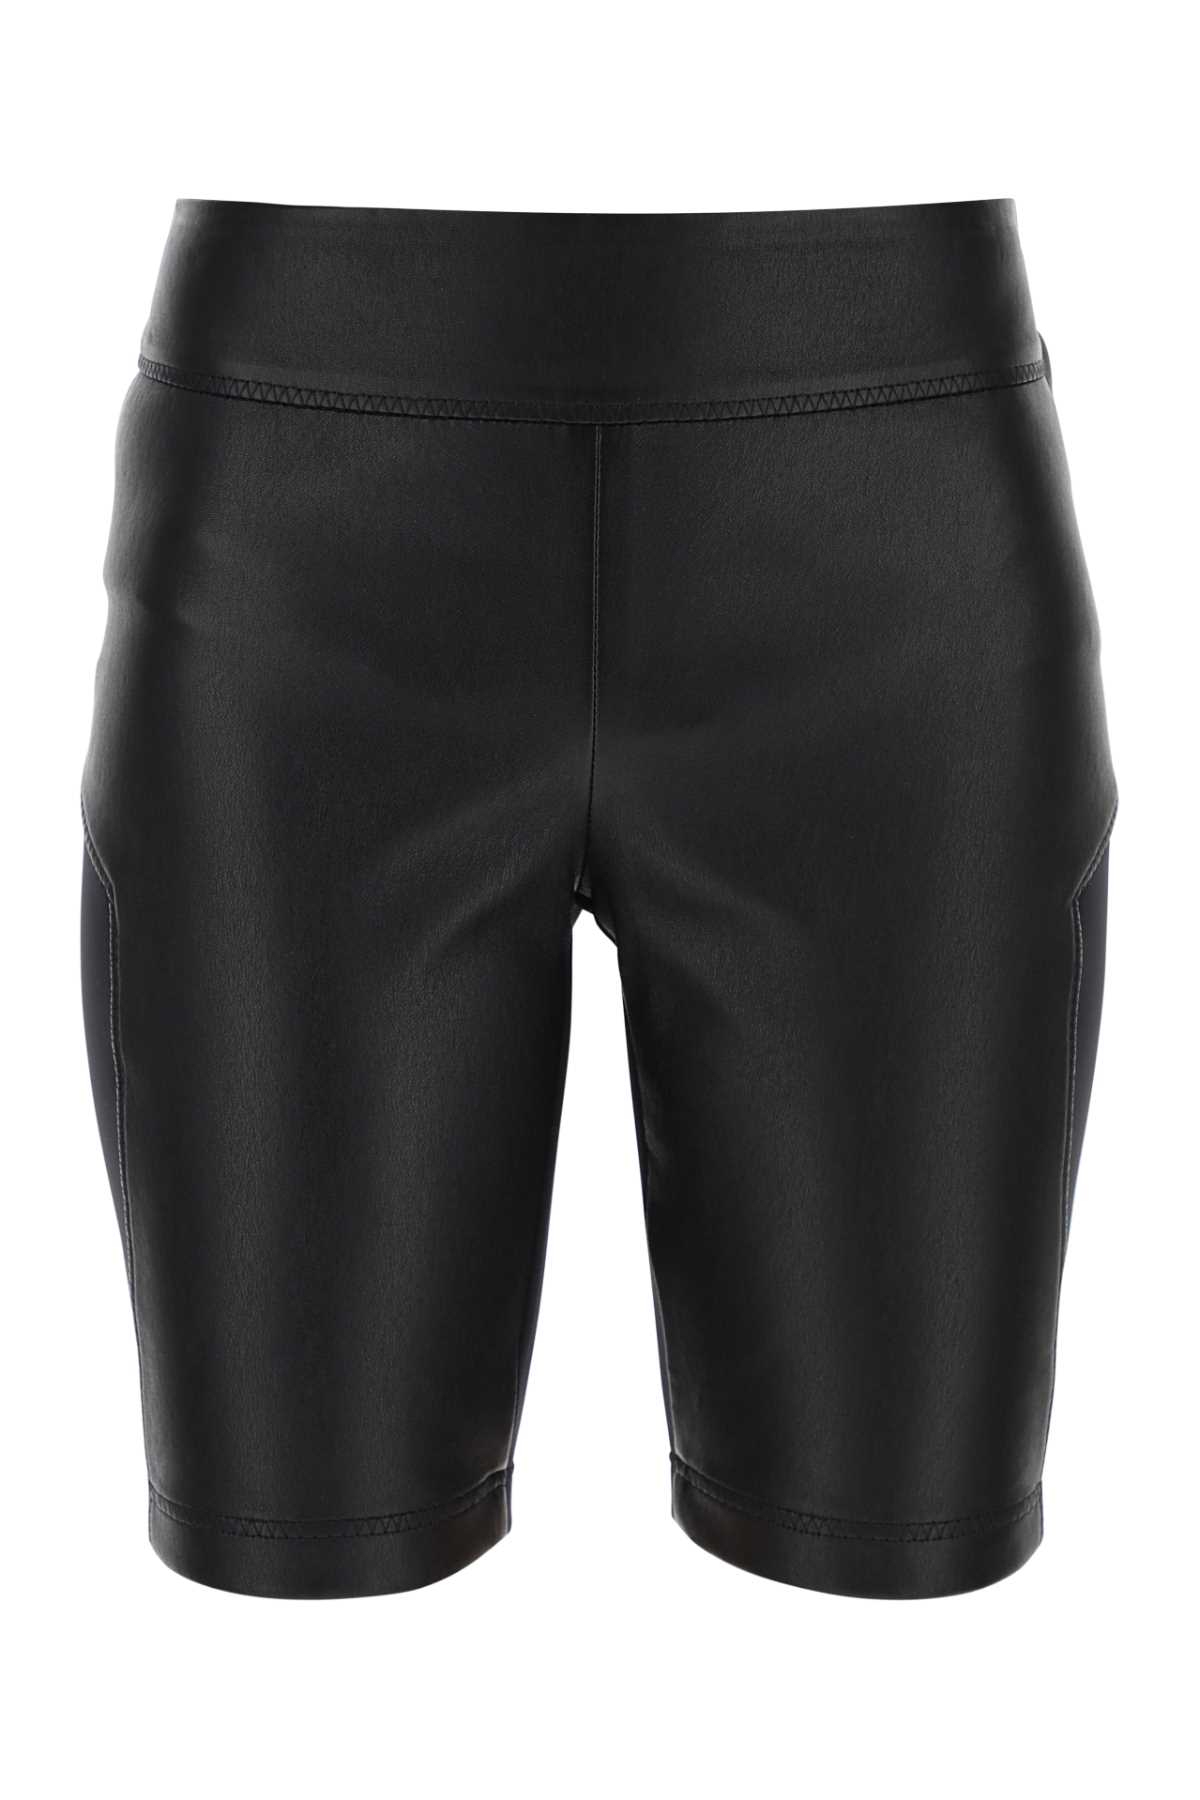 Black Leather And Fabric Leggings